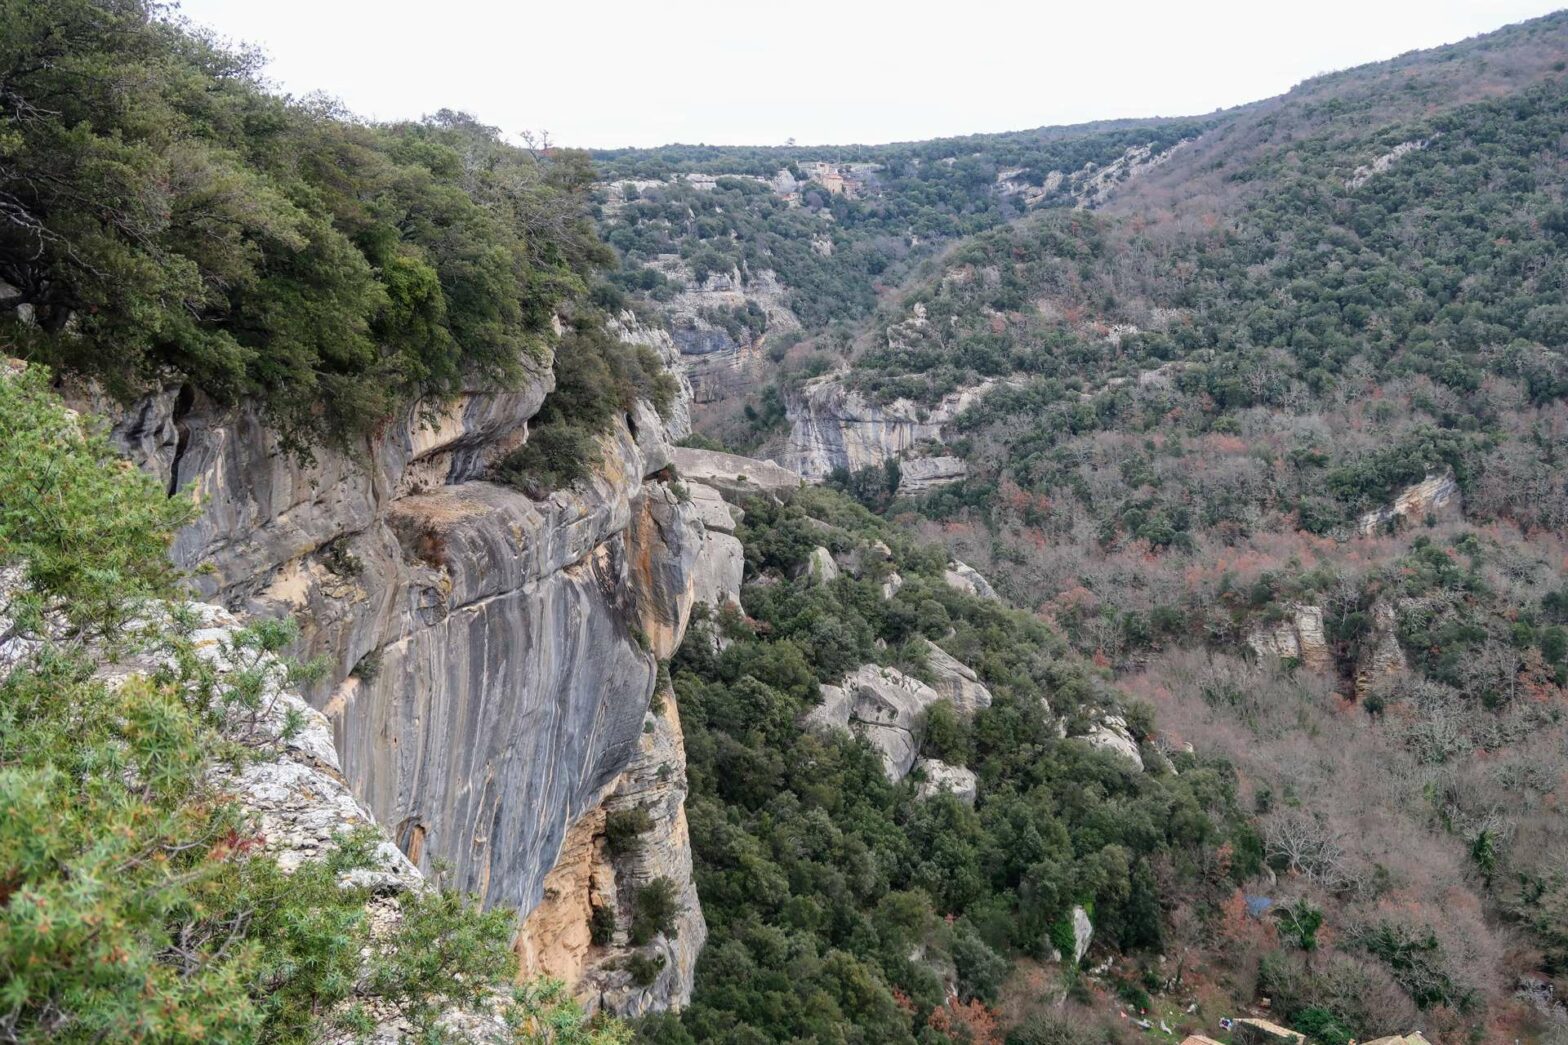 Walking along the cliffs at Buoux Gorge, Luberon, Provence